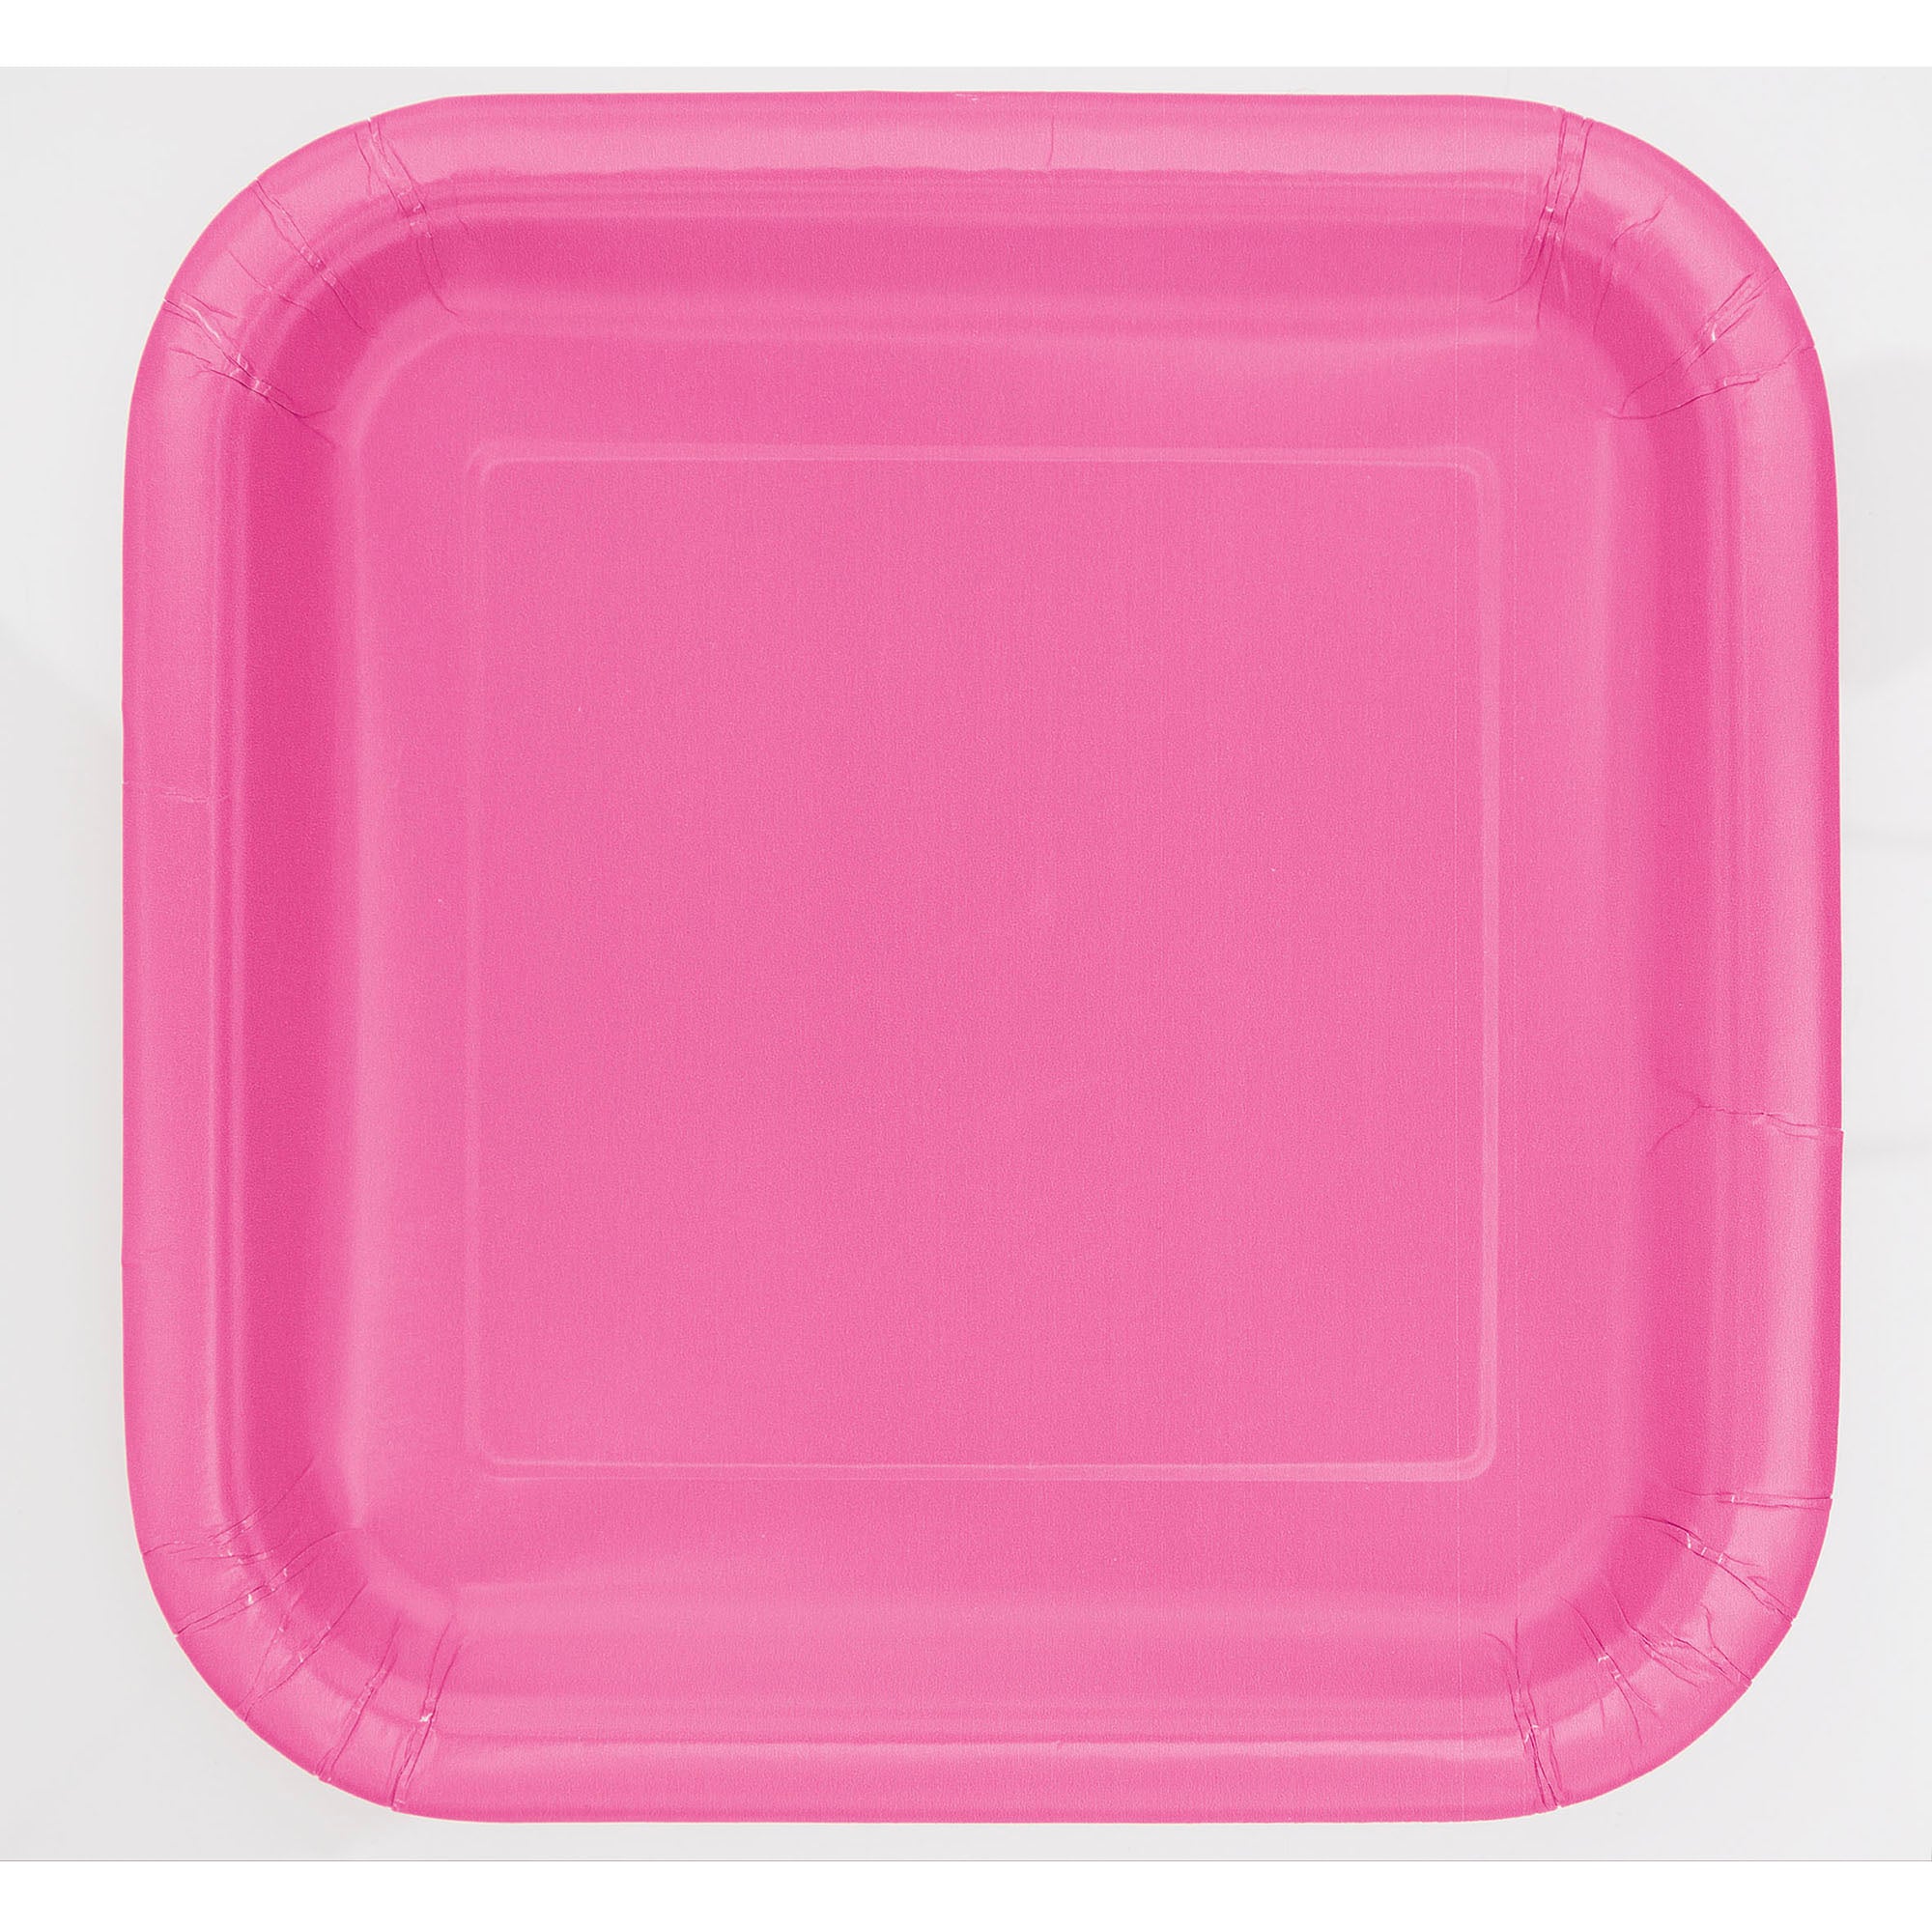 16 Square Paper Plates Hot Pink 7in